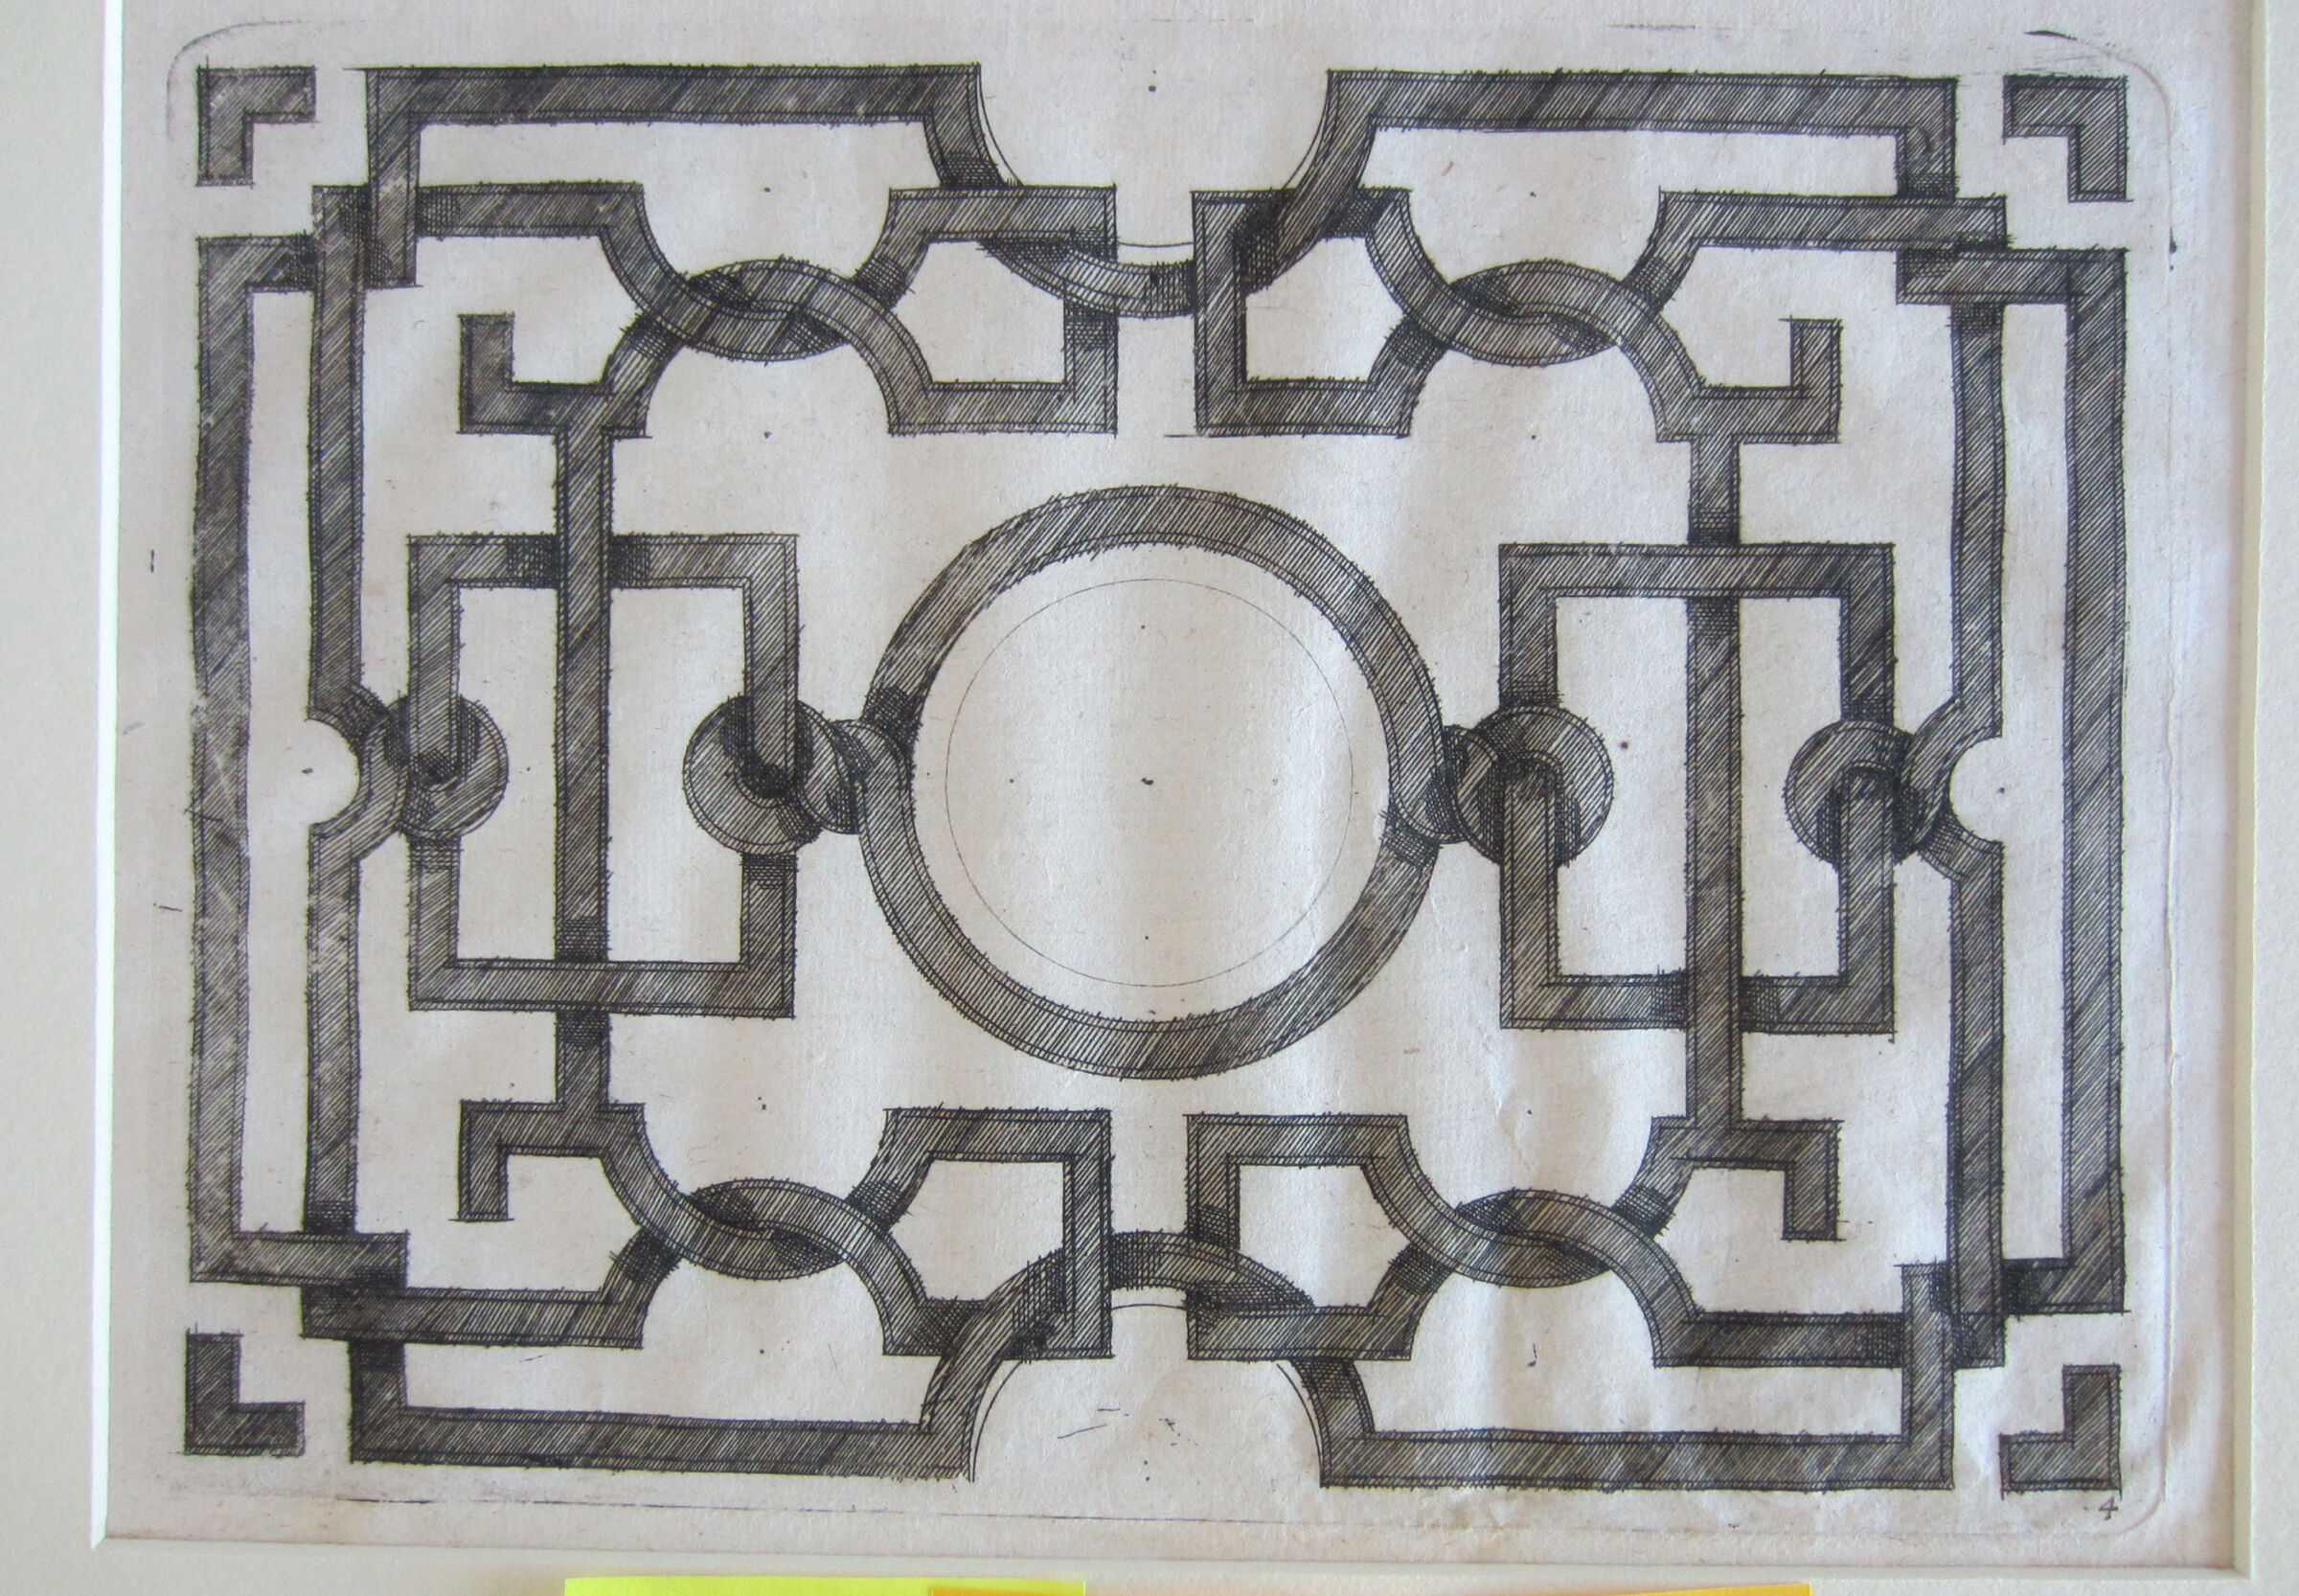 Interlace With Internal Outlining, Centered By An Outlined Circle